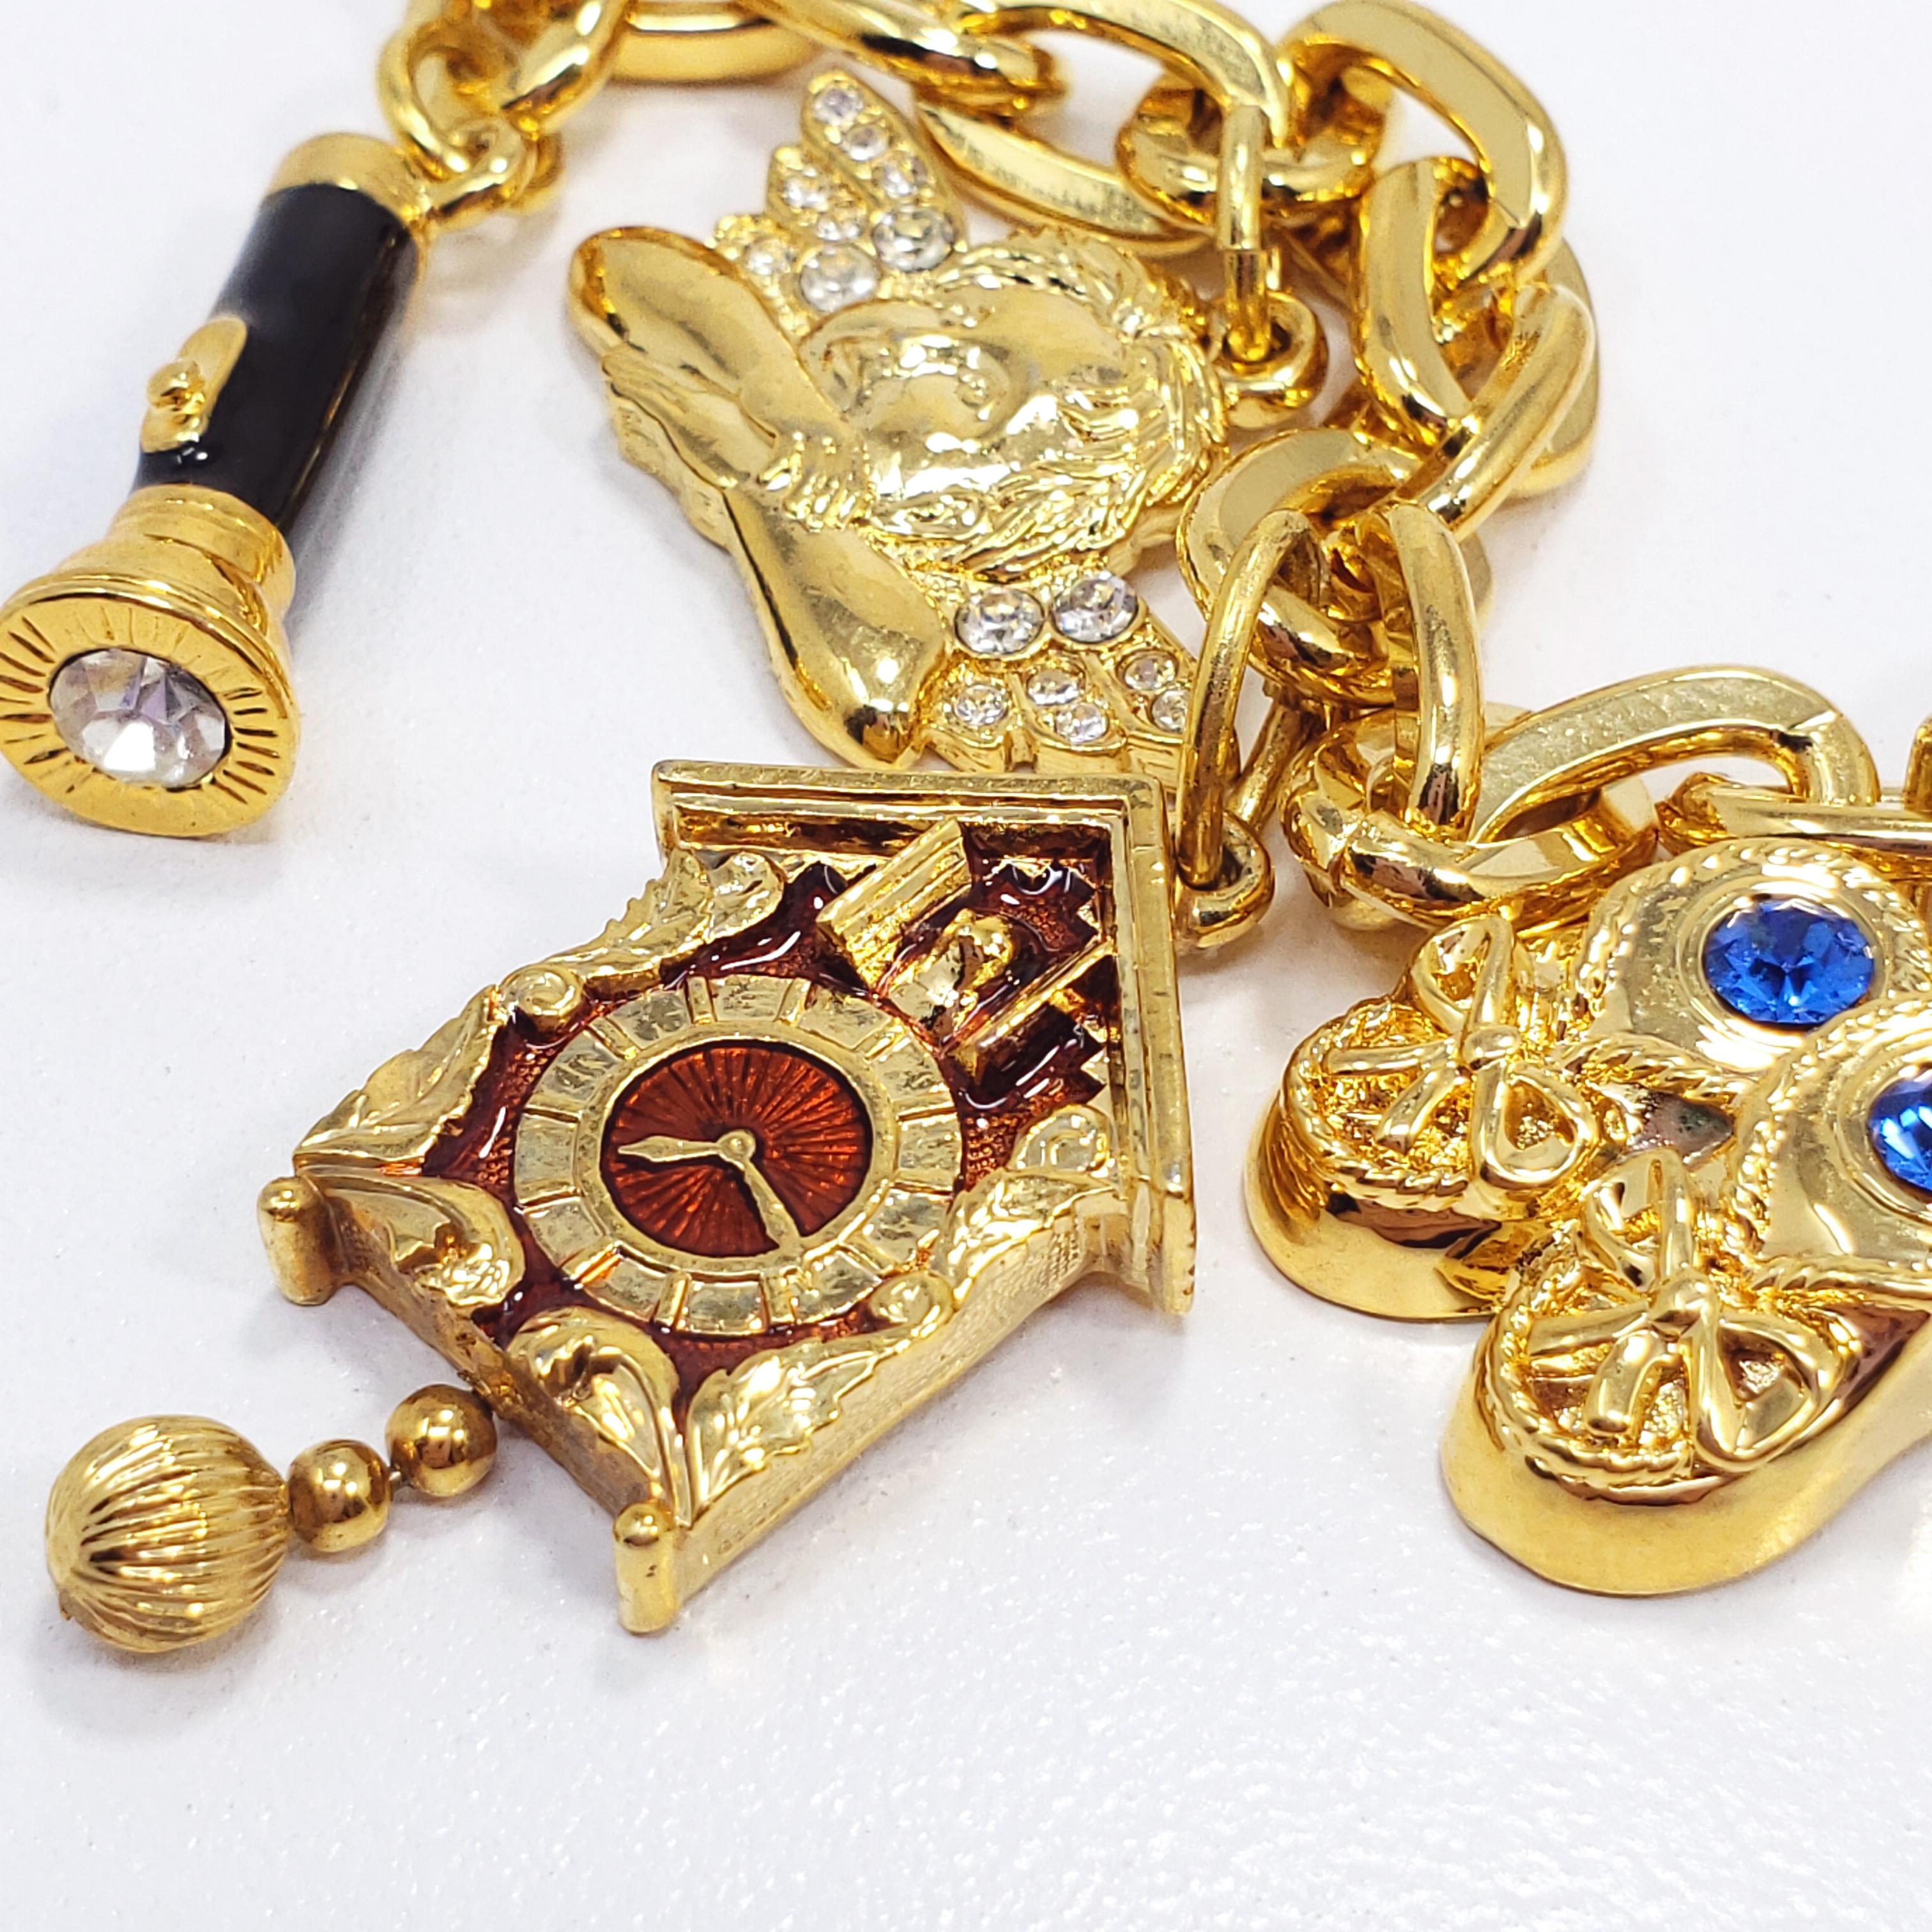 A gold-plated chain bracelet with five charms - a pair of lucky dice, shoes, a cuckoo clock, an angel, and flashlight. Accented with crystals and enamel, fastened with a toggle clasp. By Kenneth Jay Lane.

Hallmarks: © KJL